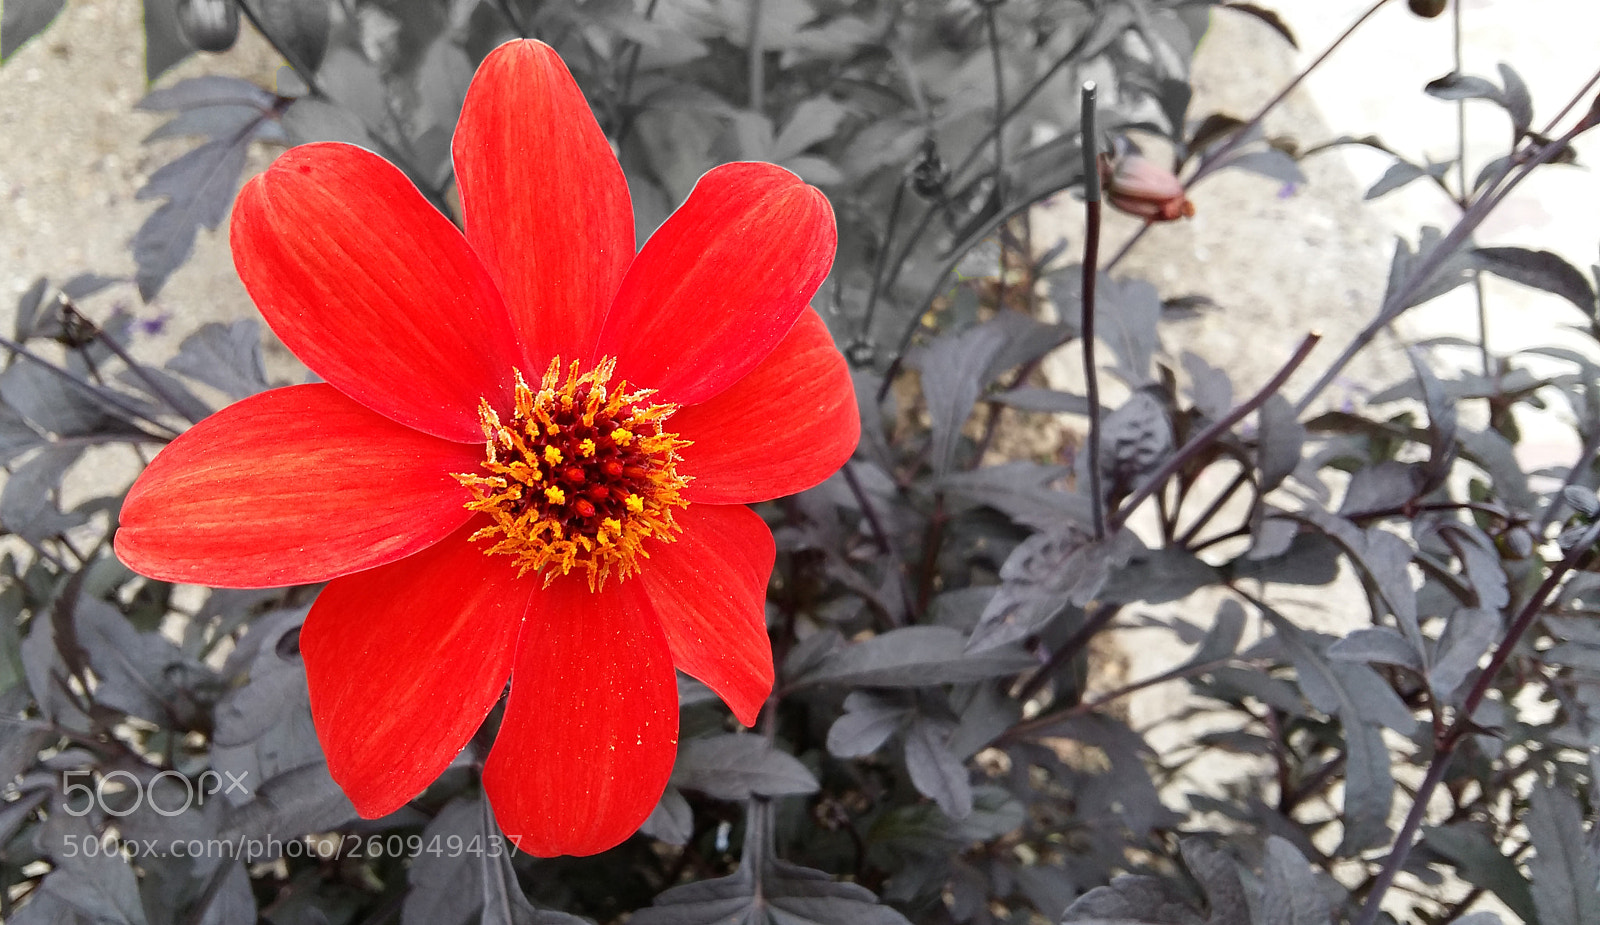 Samsung Galaxy A5 sample photo. Red flower, black leaves photography